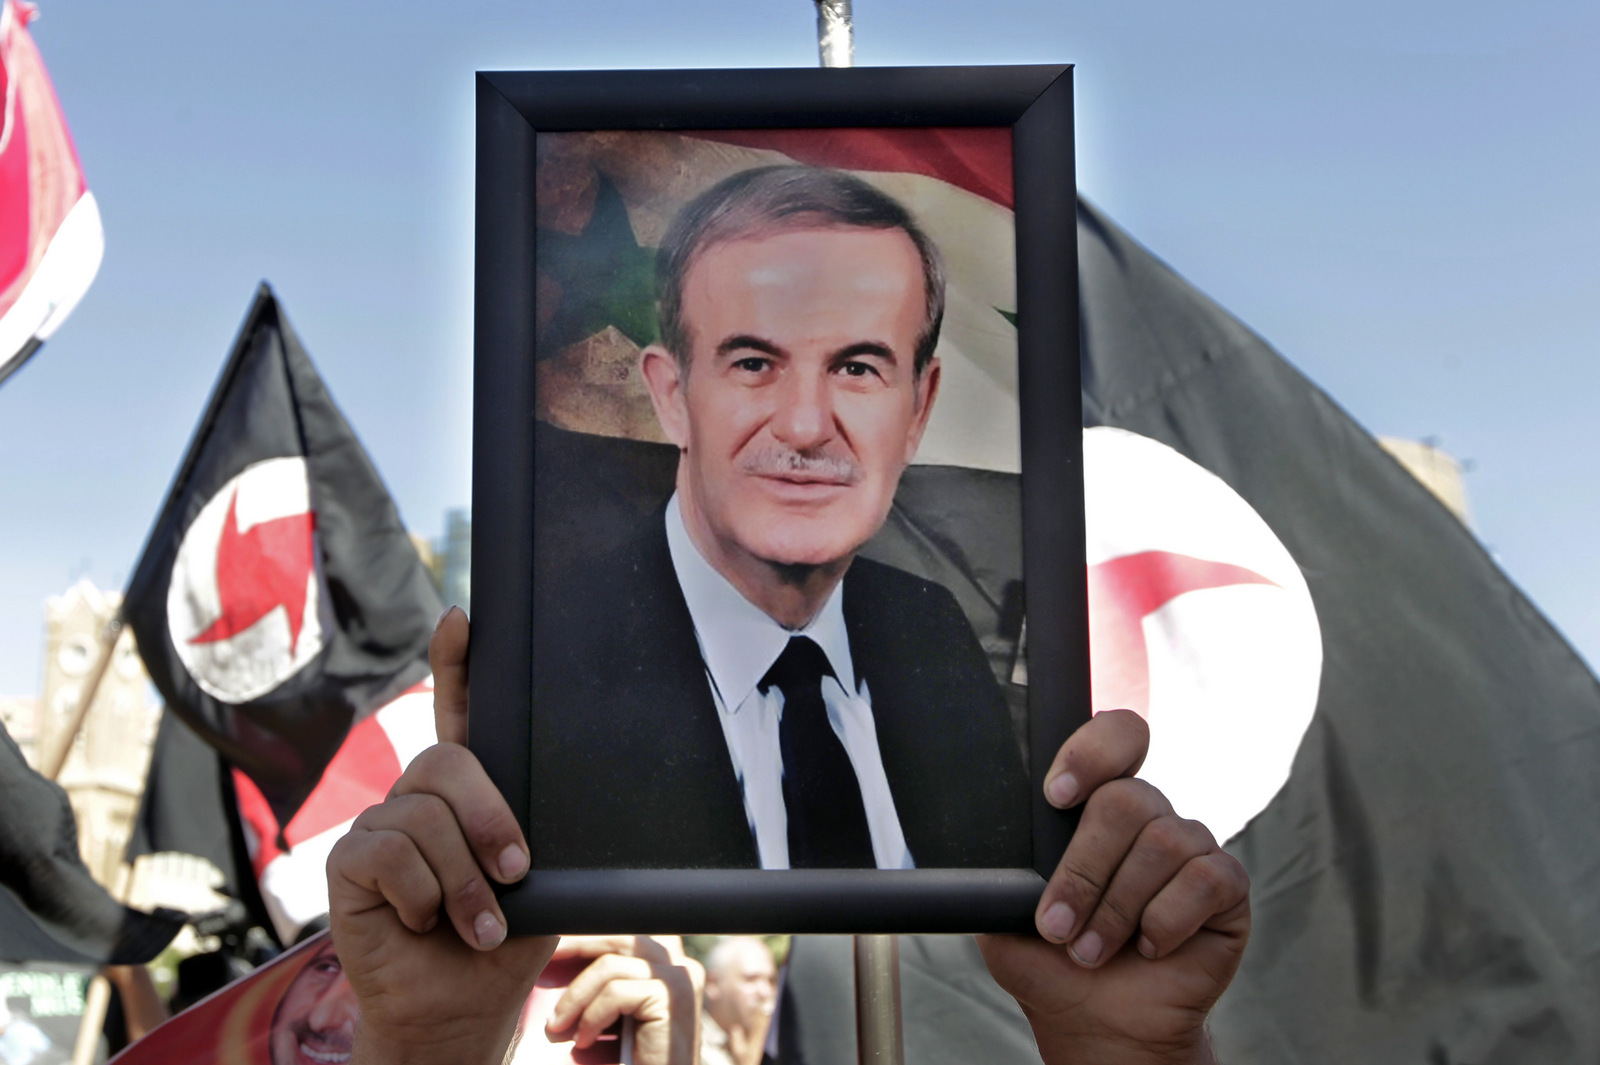 The Syrian Social Nationalist Party logo is seen behind a portrait of late Syrian President Hafez Assad during a demonstration against possible US military action in Syria, in front of the UN headquarters, in Beirut, Lebanon,, Sept. 8, 2013. (AP/Bilal Hussein)